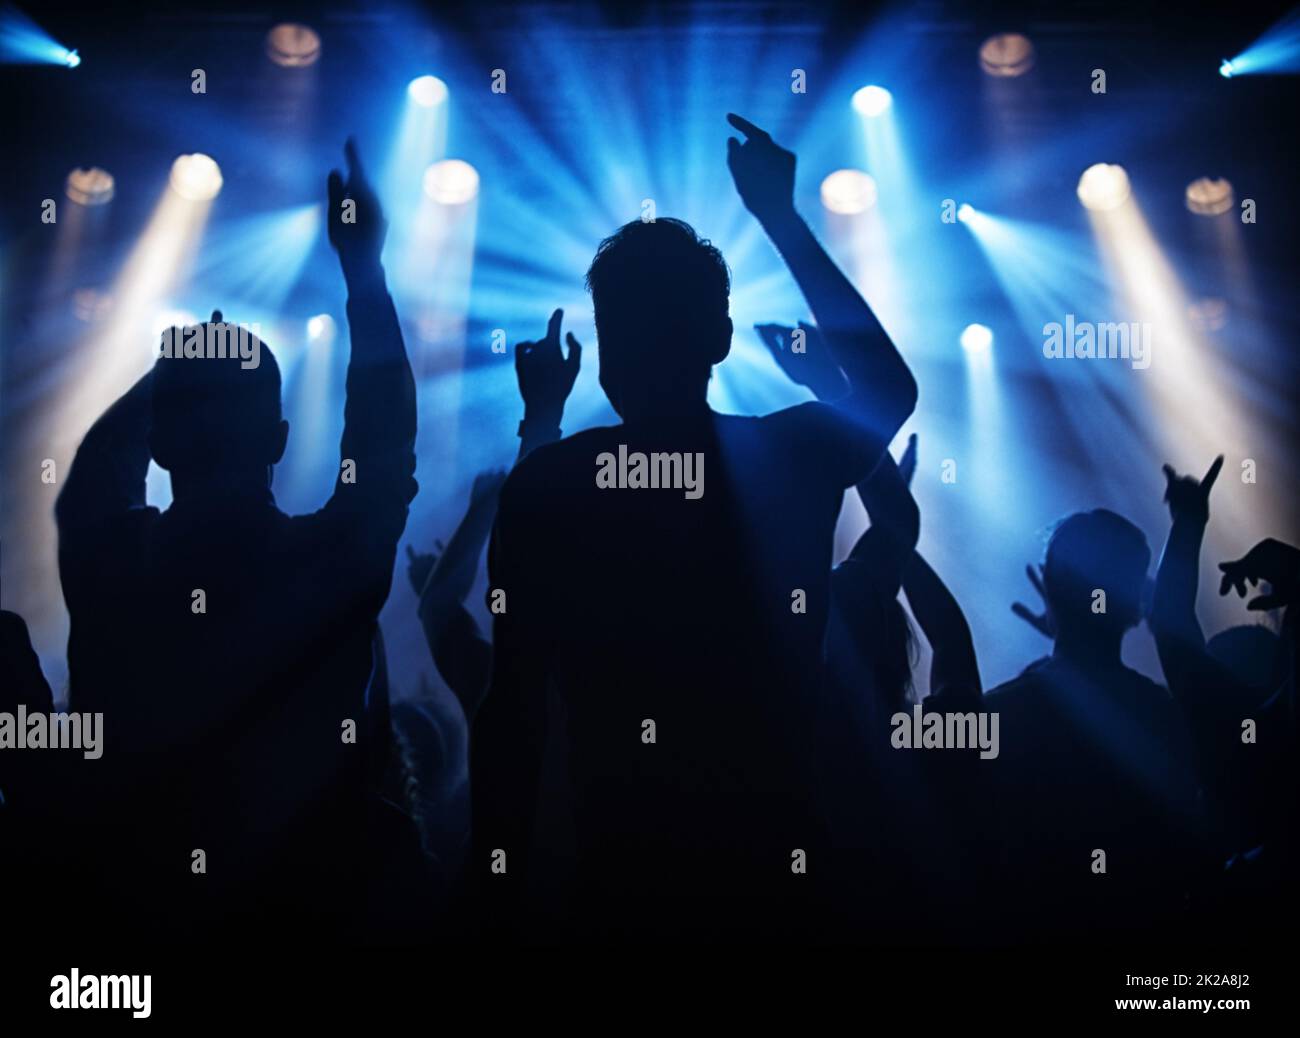 Fun at the gig. Silhouette of a crowd of young adults at a concert. Stock Photo